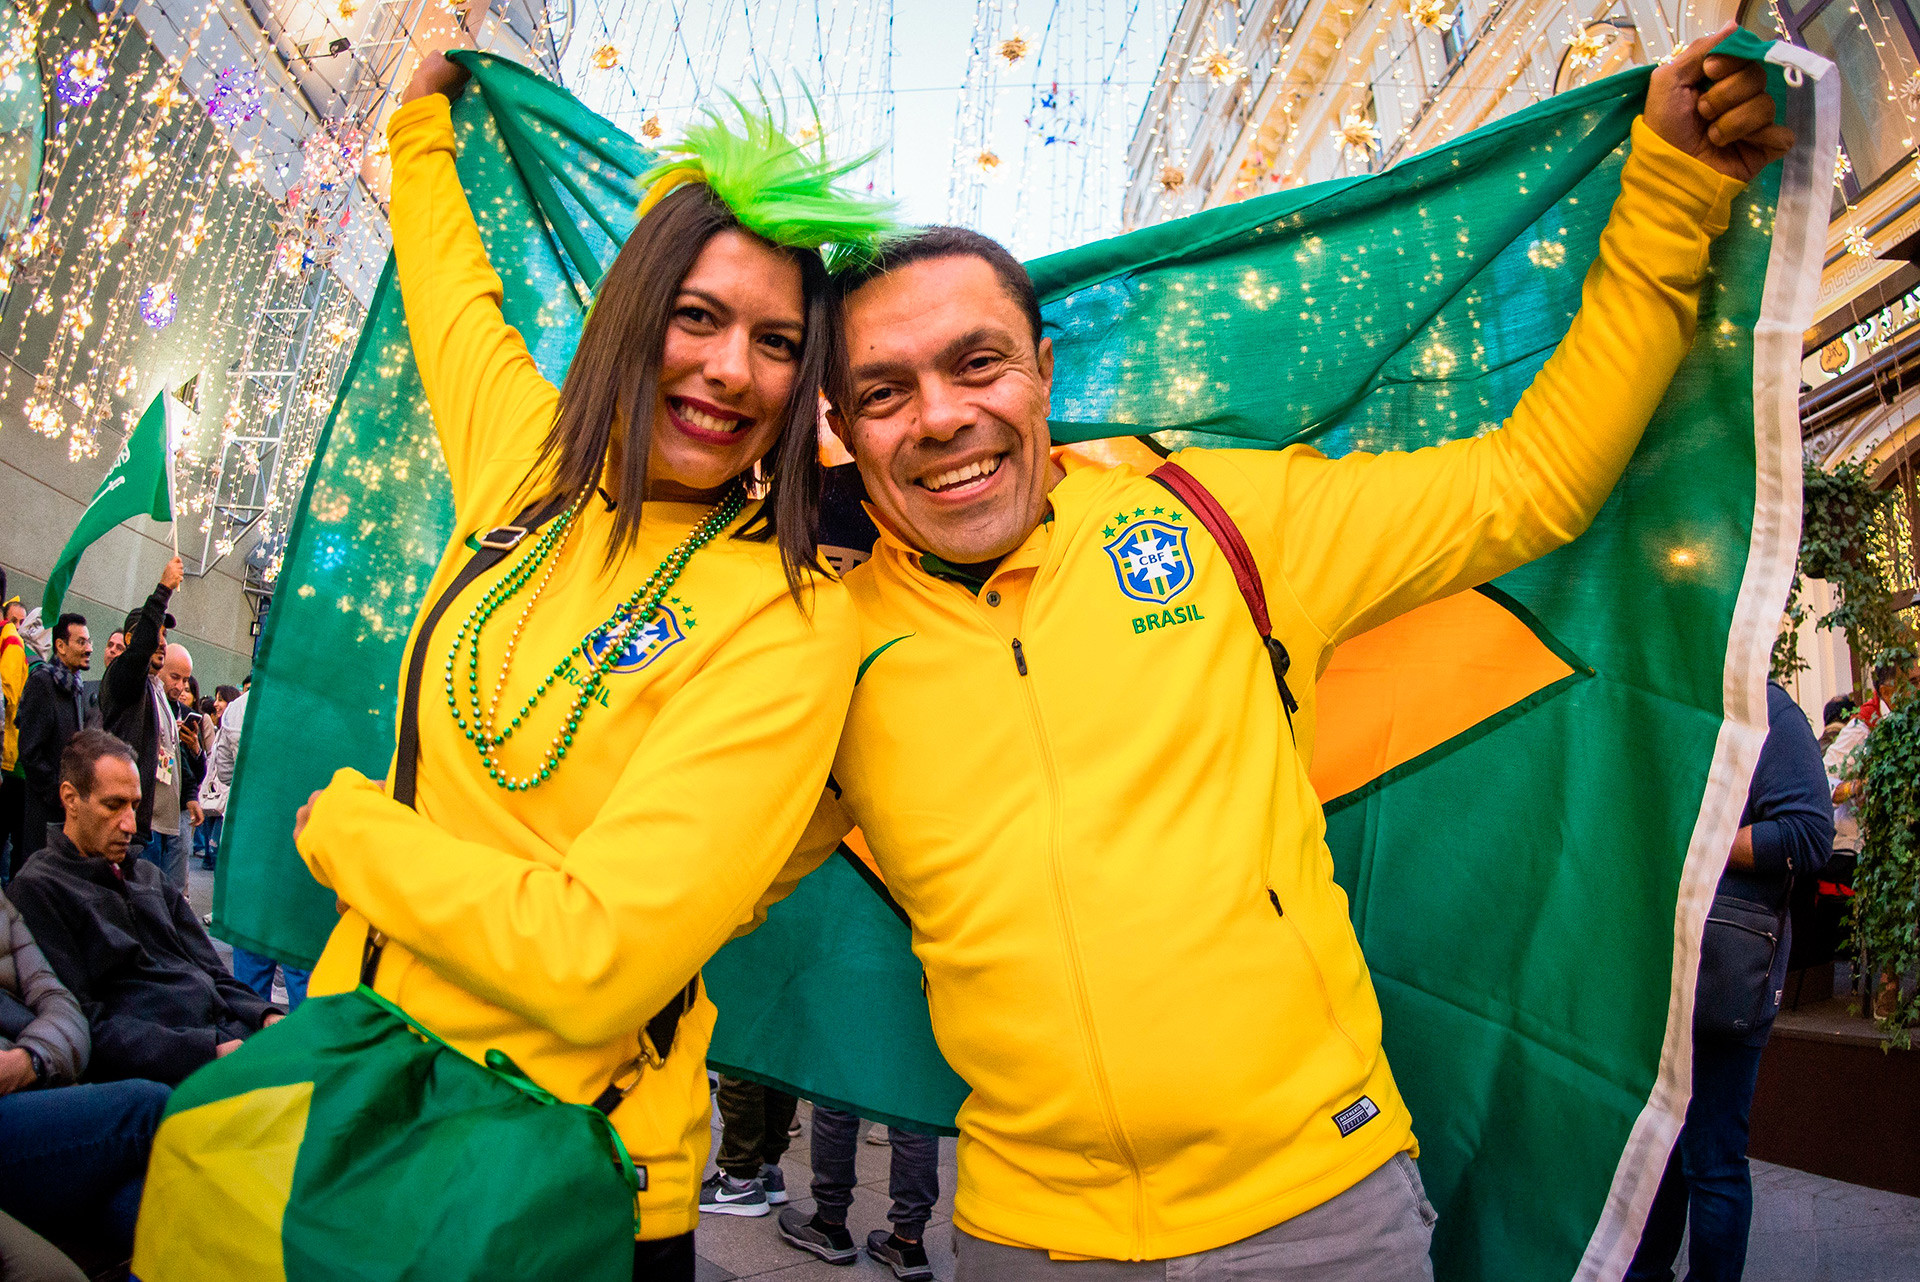 Brazil fans have arrived in Moscow en masse, bringing the carnival atmosphere with them. They have reason to be optimistic: With Neymar Jr.’s firepower up front, the Seleção arrive in Russia as hot favorites to lift the trophy on July 15.